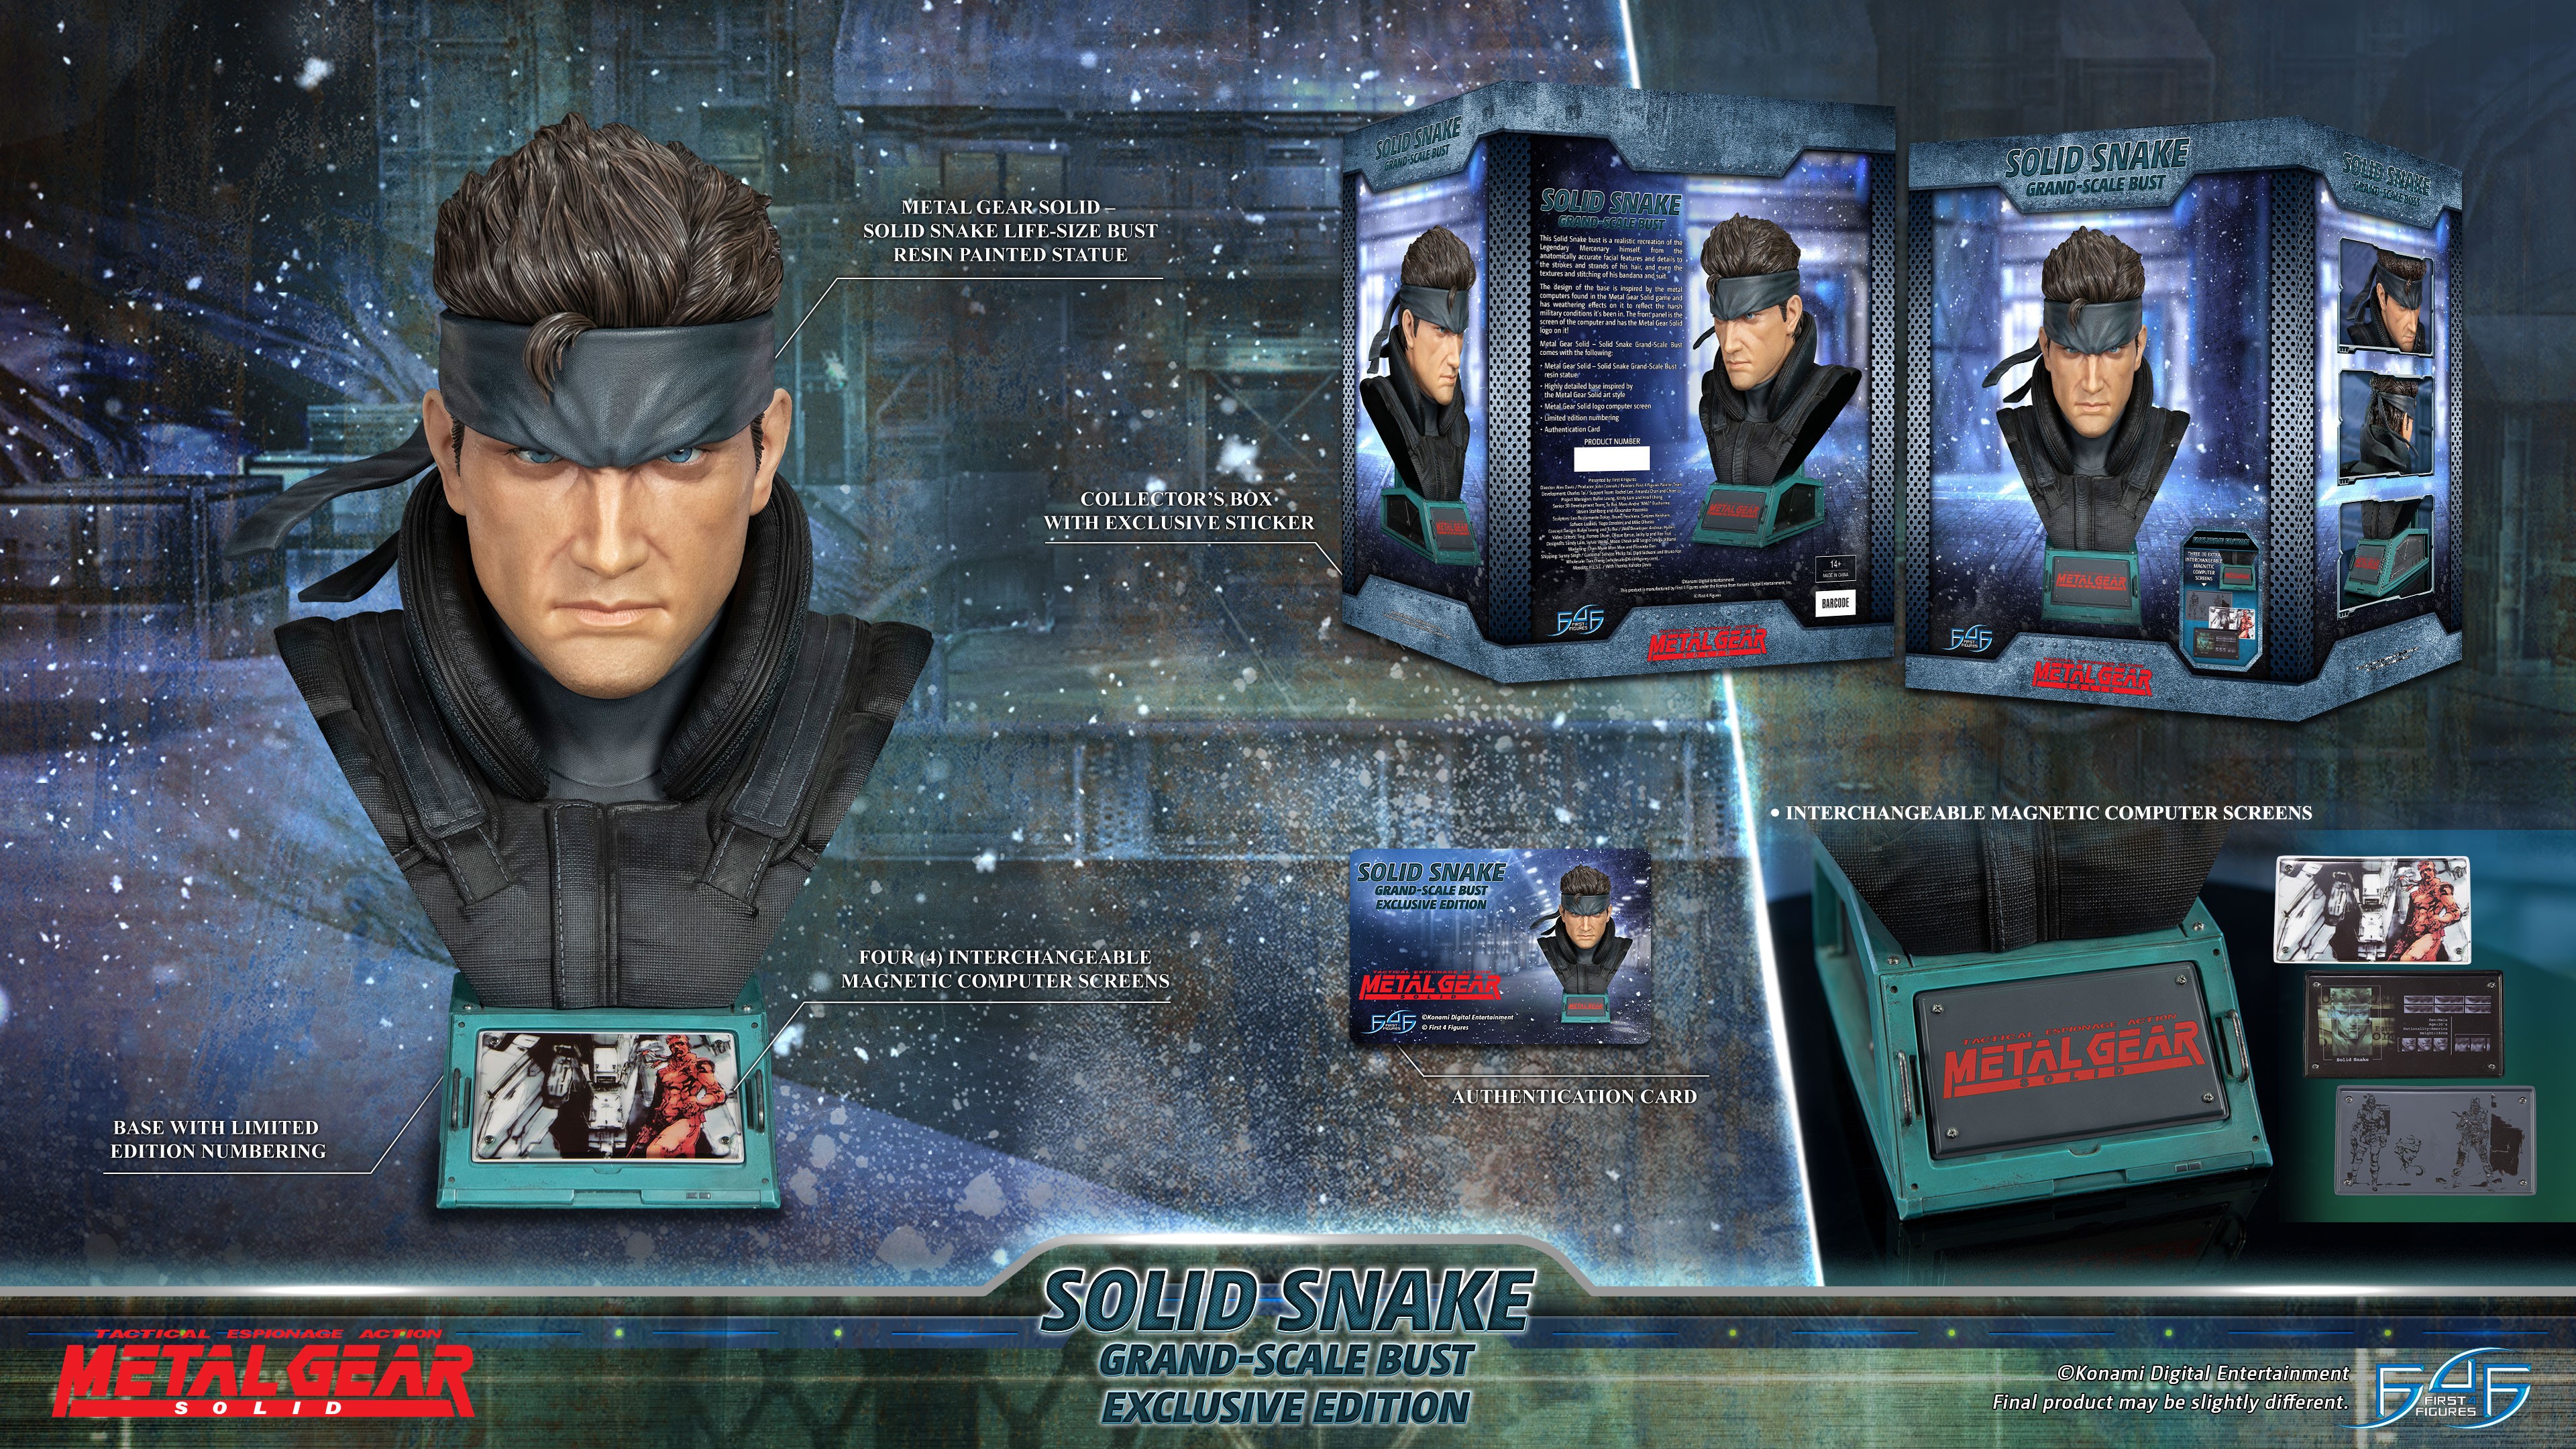 Metal Gear Solid - Solid Snake Grand-Scale Bust (Exclusive Edition GSB)